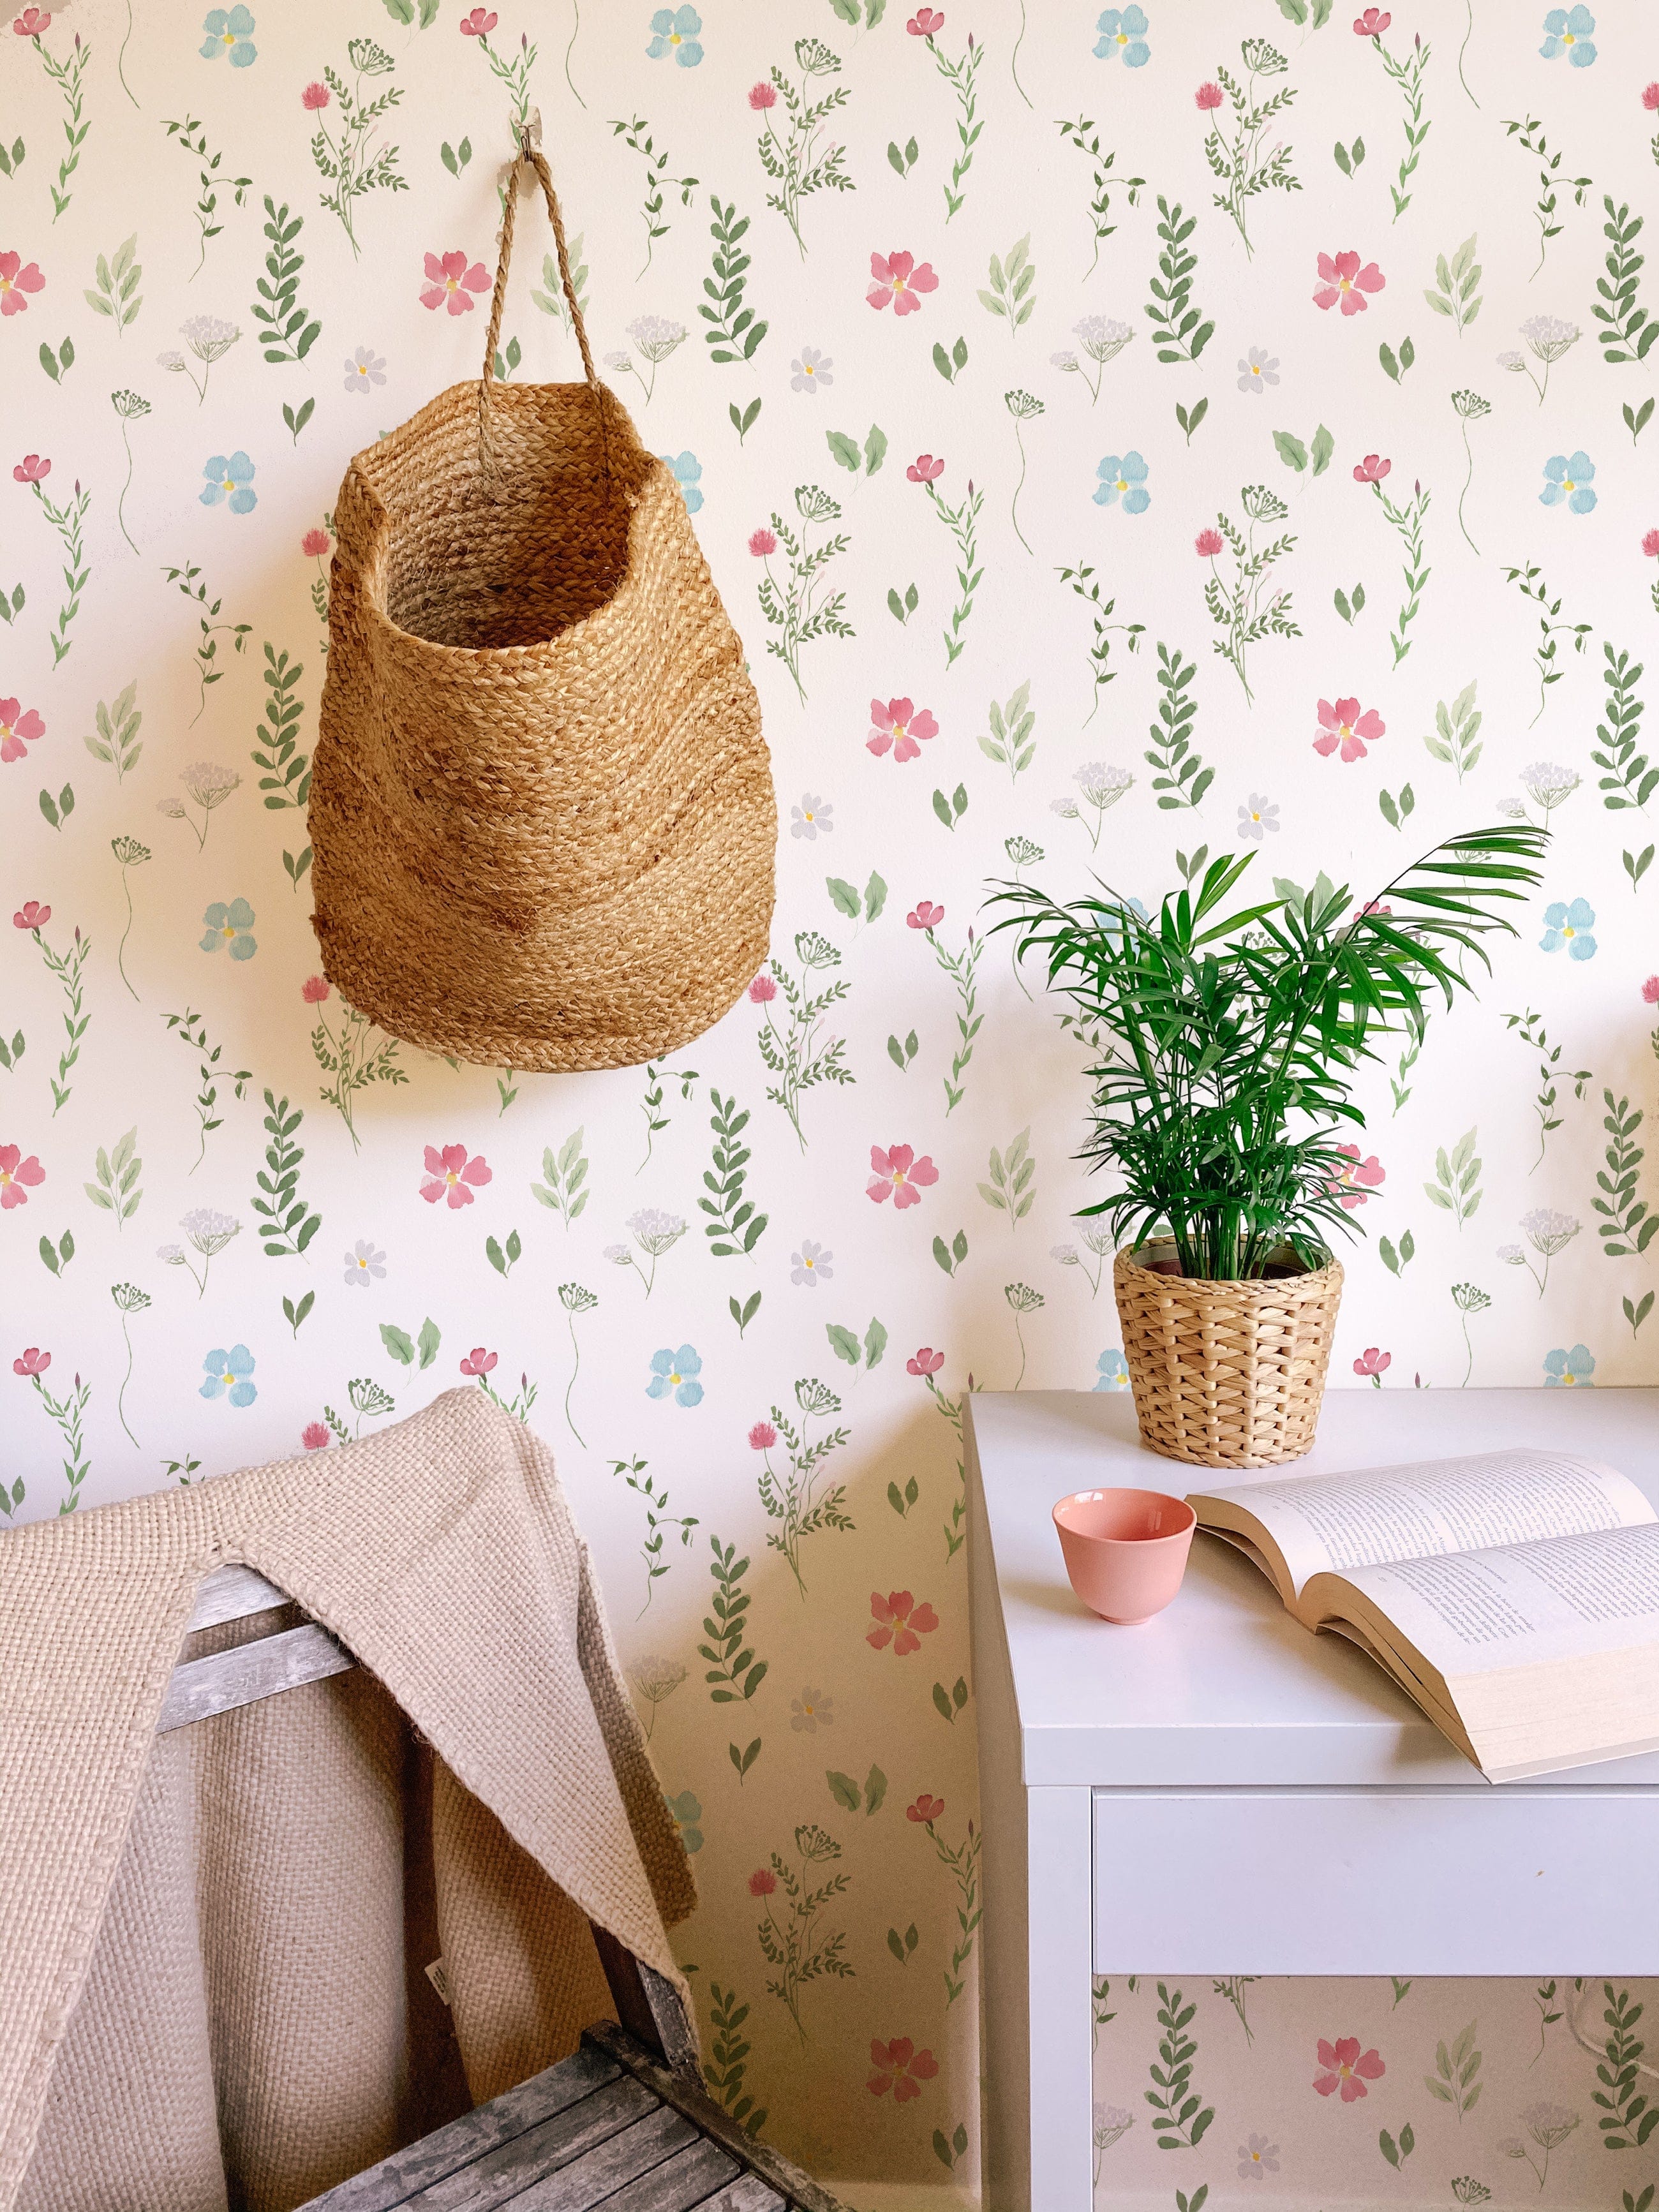 A cozy room featuring the Spring Field Wallpaper - VIII with a soft white background adorned with delicate pink, blue, and yellow flowers and green leaves. The decor includes a woven basket hanging on the wall and a small potted plant on a white desk